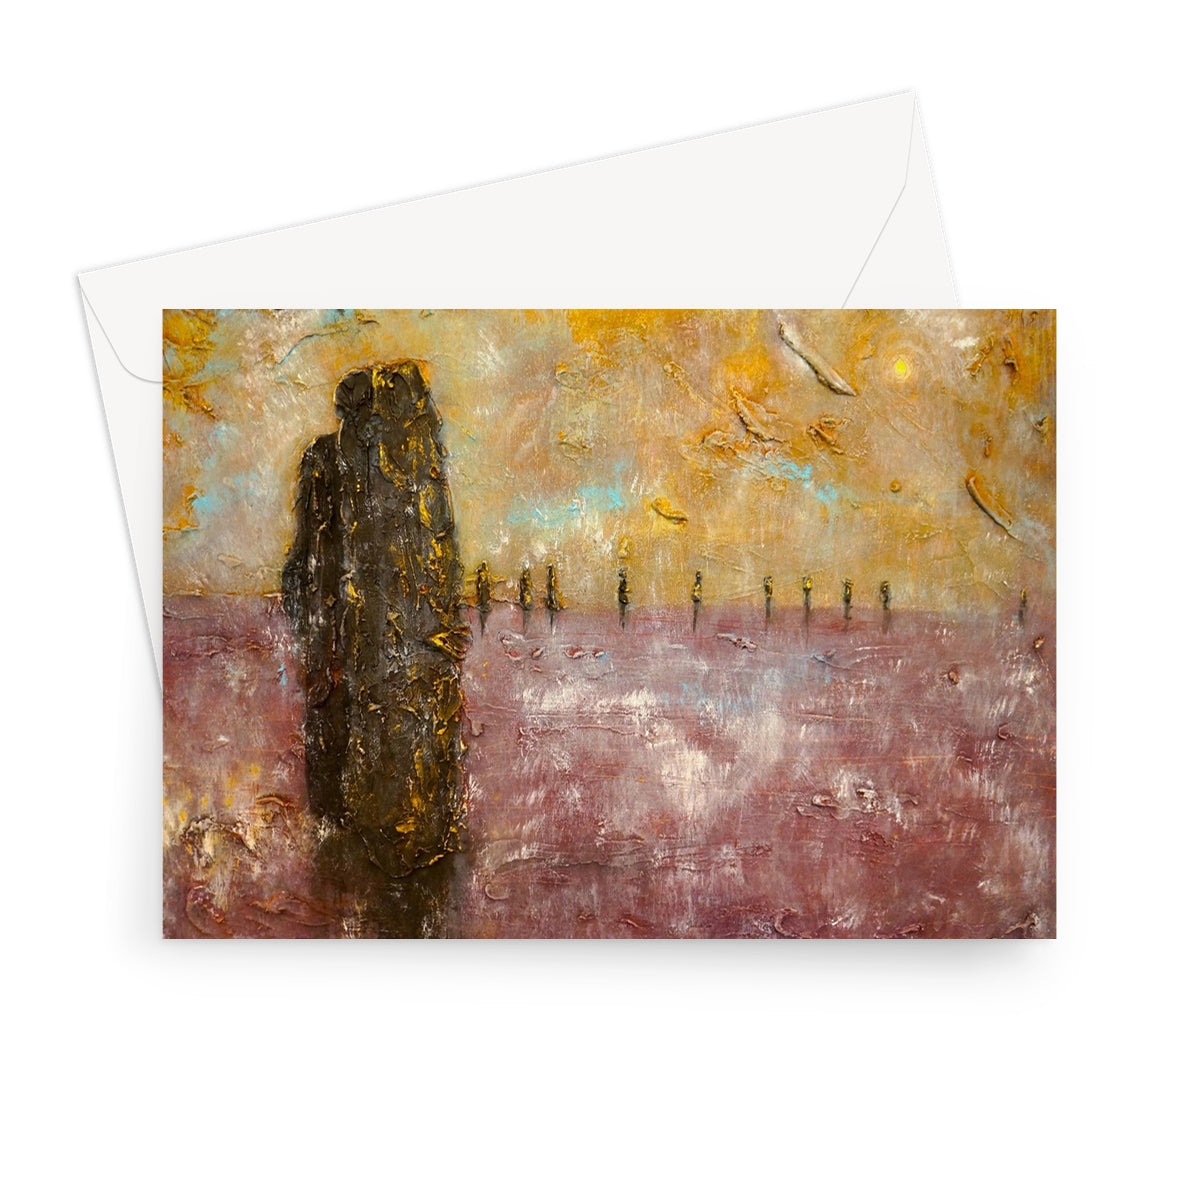 Brodgar Mist Orkney Art Gifts Greeting Card-Greetings Cards-Orkney Art Gallery-7"x5"-1 Card-Paintings, Prints, Homeware, Art Gifts From Scotland By Scottish Artist Kevin Hunter